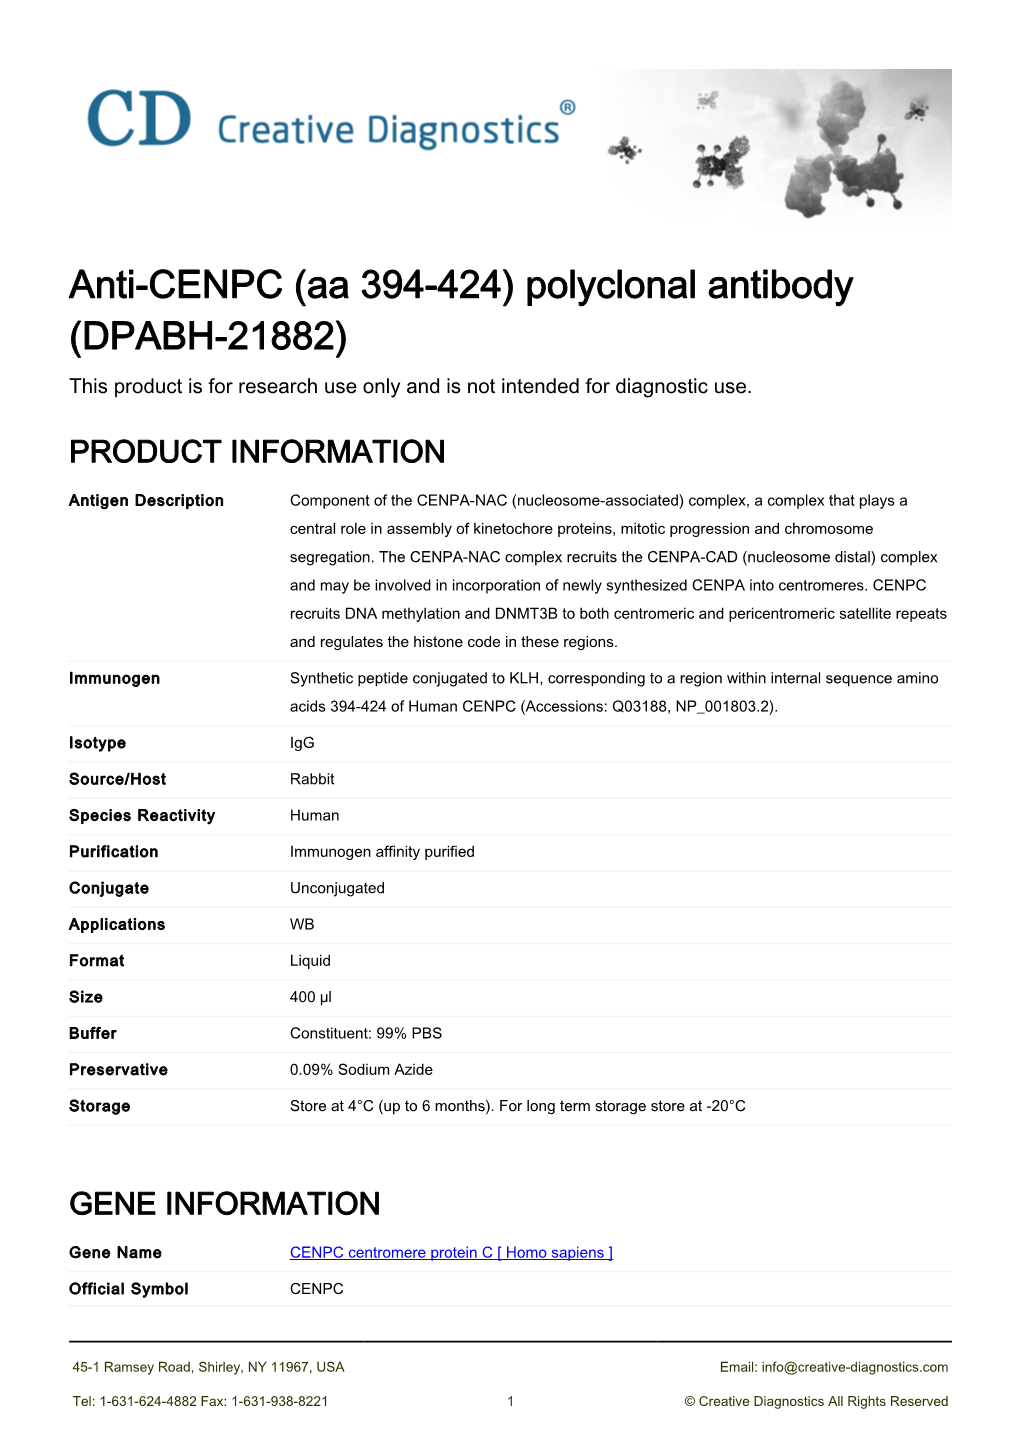 Anti-CENPC (Aa 394-424) Polyclonal Antibody (DPABH-21882) This Product Is for Research Use Only and Is Not Intended for Diagnostic Use